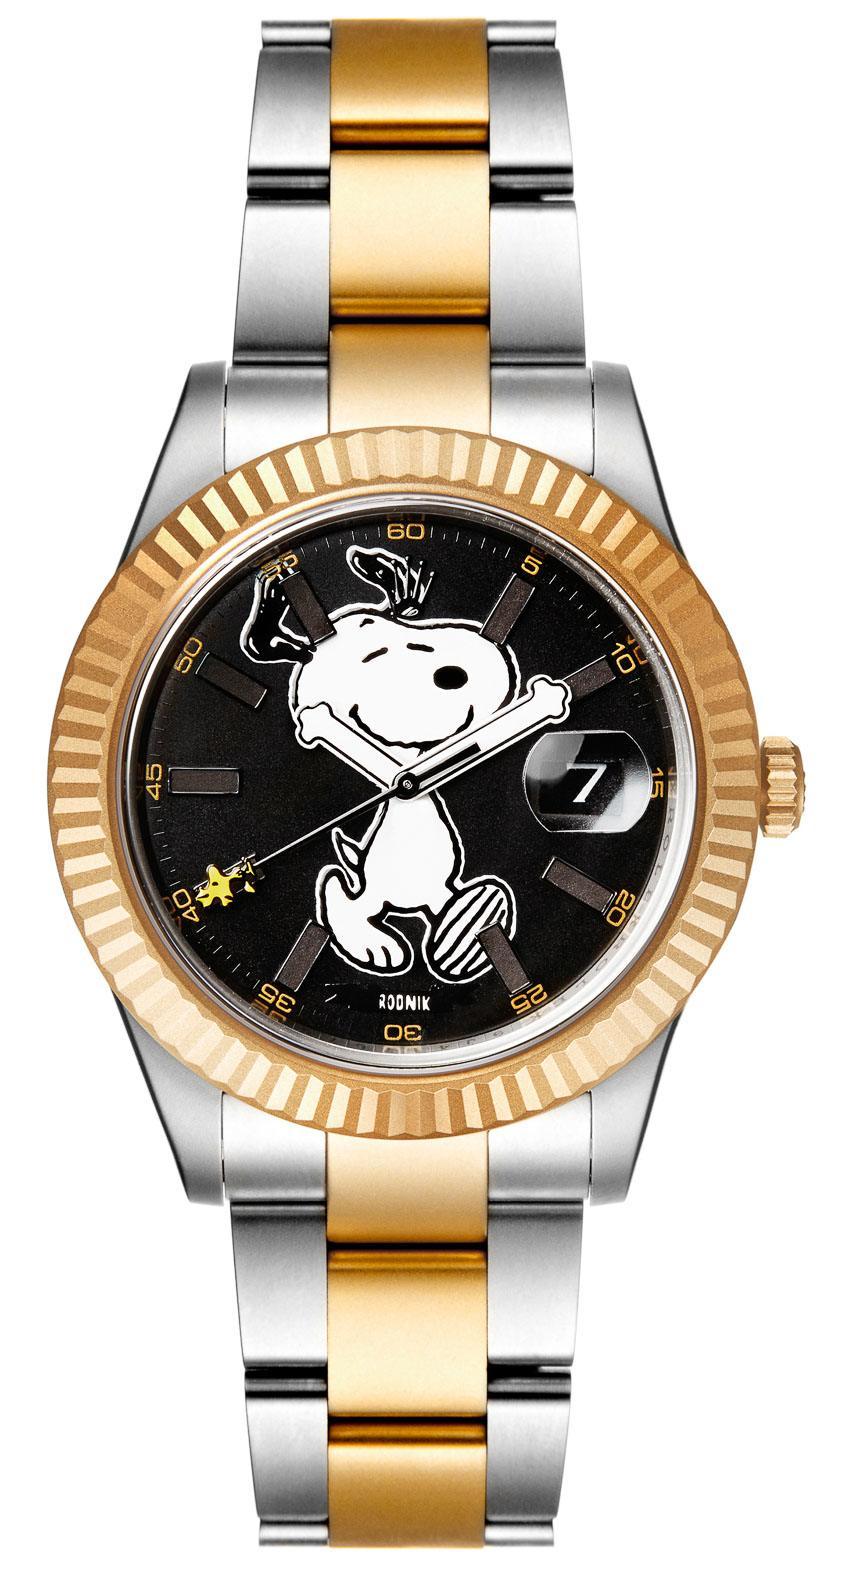 Bamford x The Rodnik Band Snoopy Customized Rolex Limited Edition Watch Watch Releases 